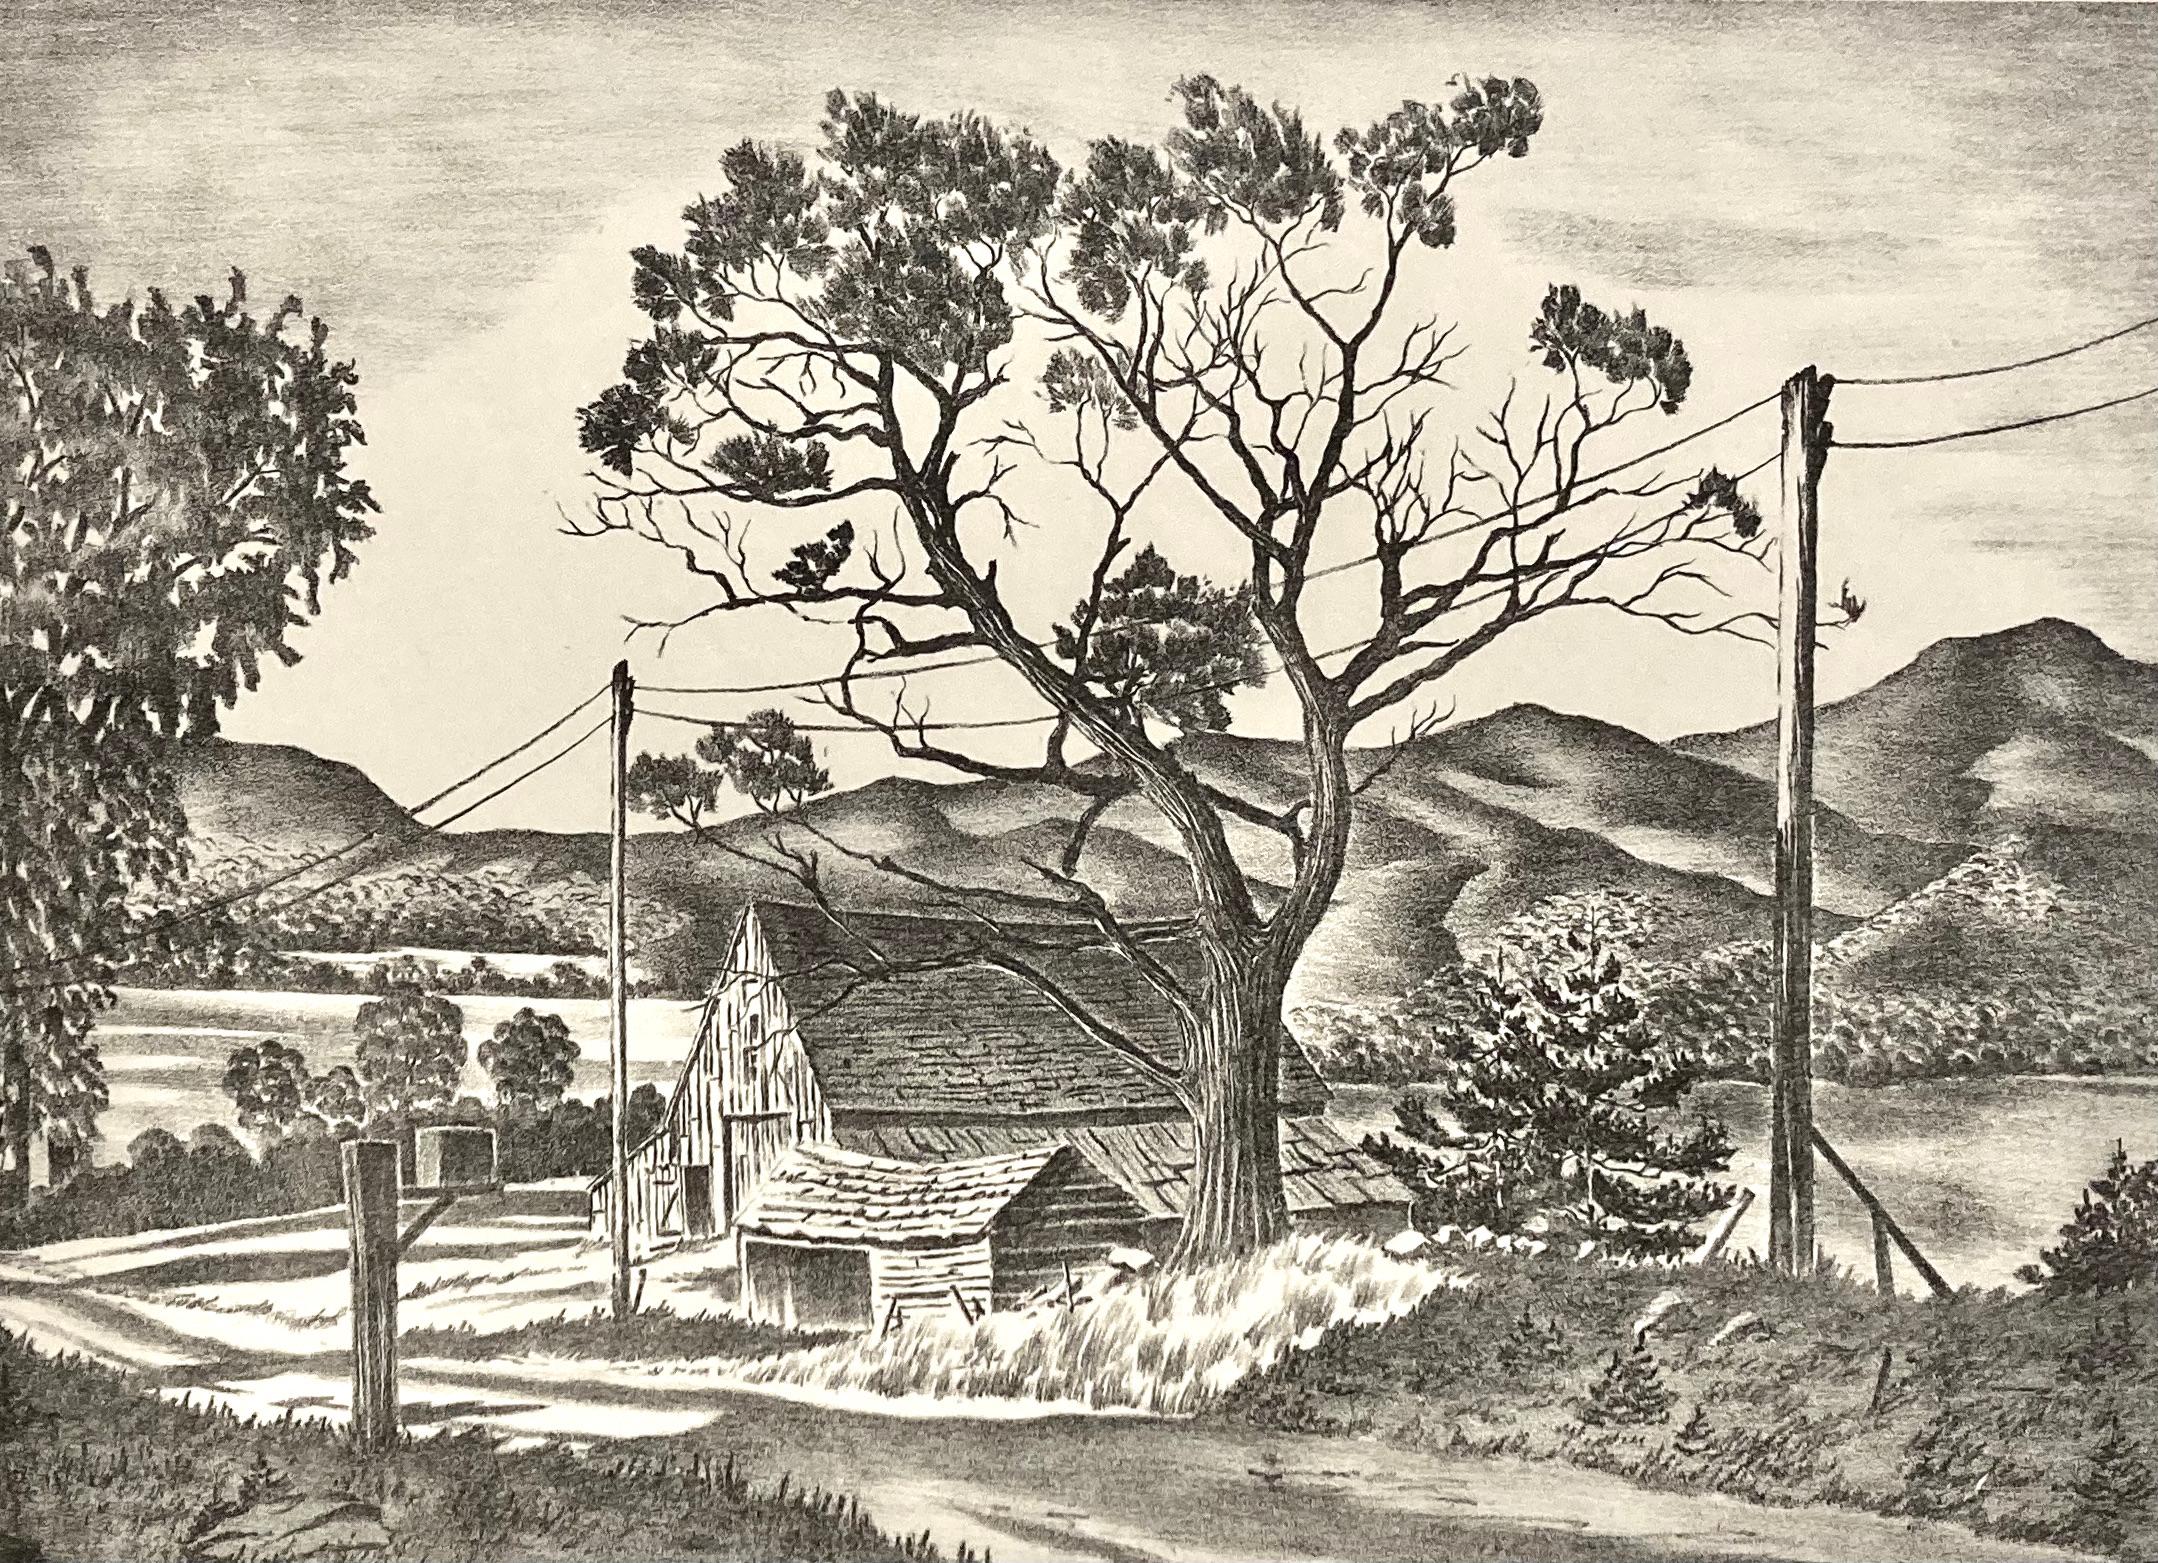 John Muench was a master at drawing on a lithographic stone. He was a New Englander and this is a classic subject both for him and for the area. The trees, the old barns, the mailbox, and the landscape itself -- the fields and the distant hills, all